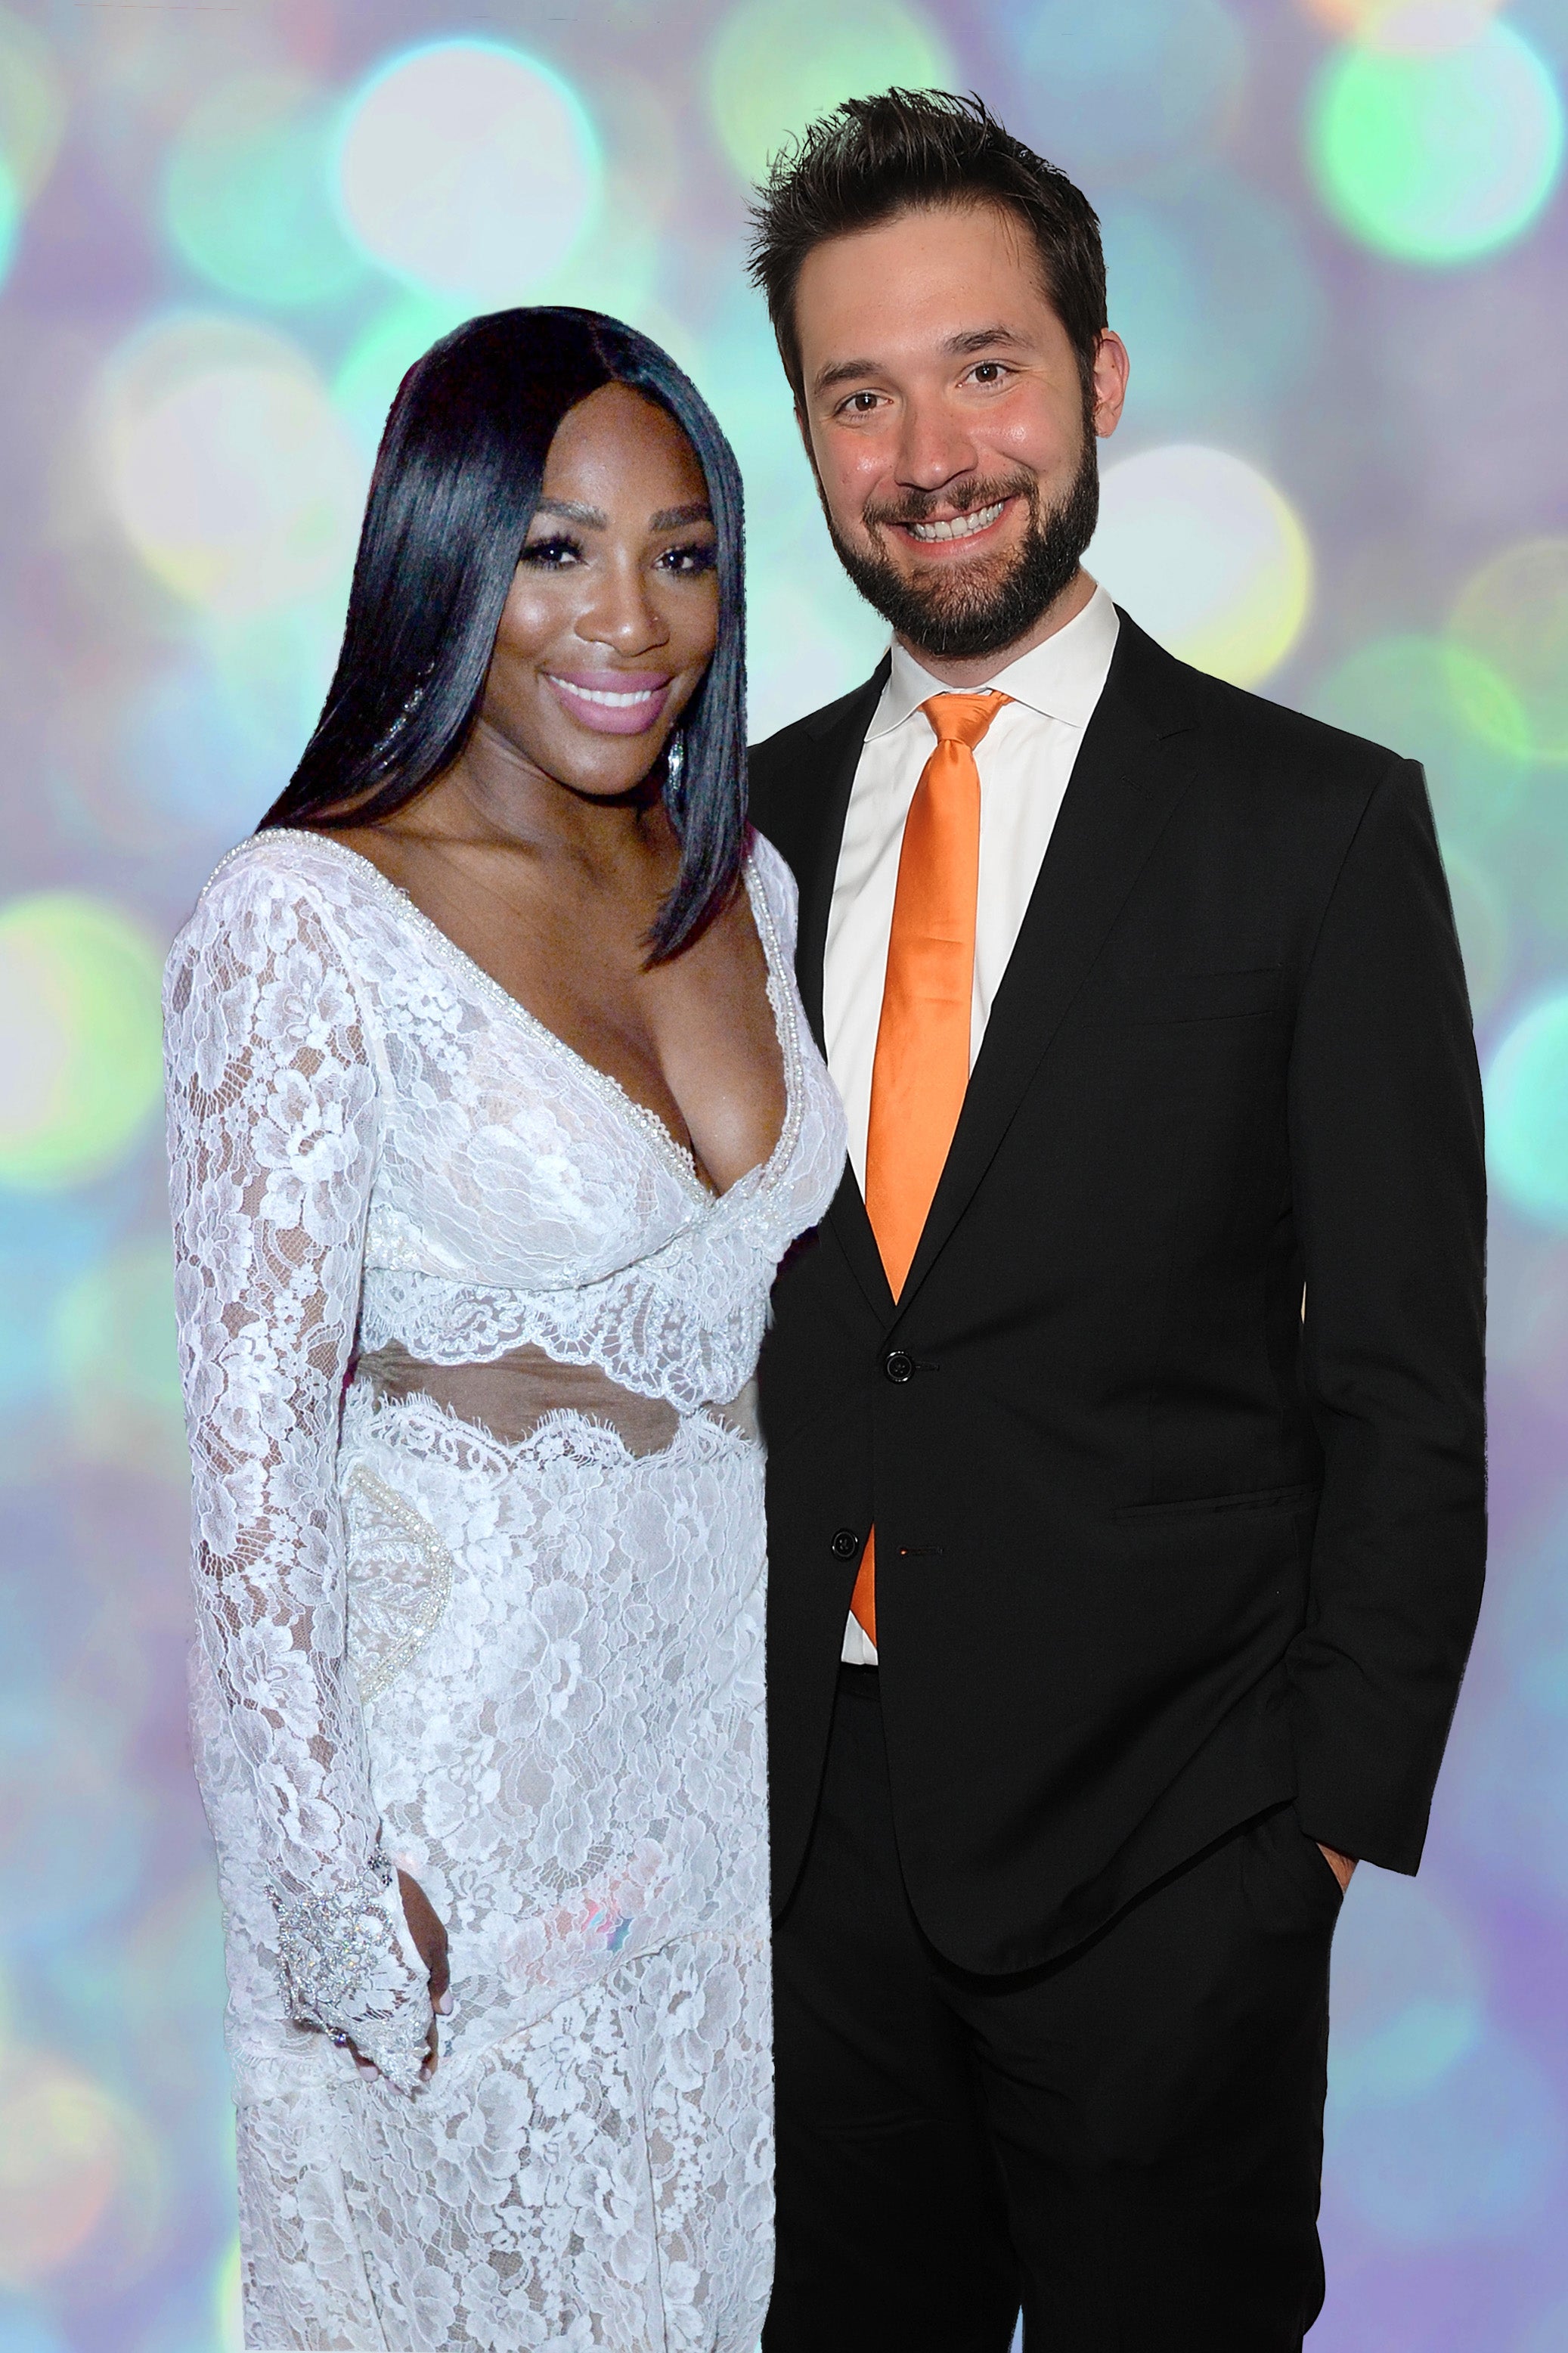 Inside Serena Williams' Bridal Shower Weekend Extravaganza: 'It Was Really Magical'
